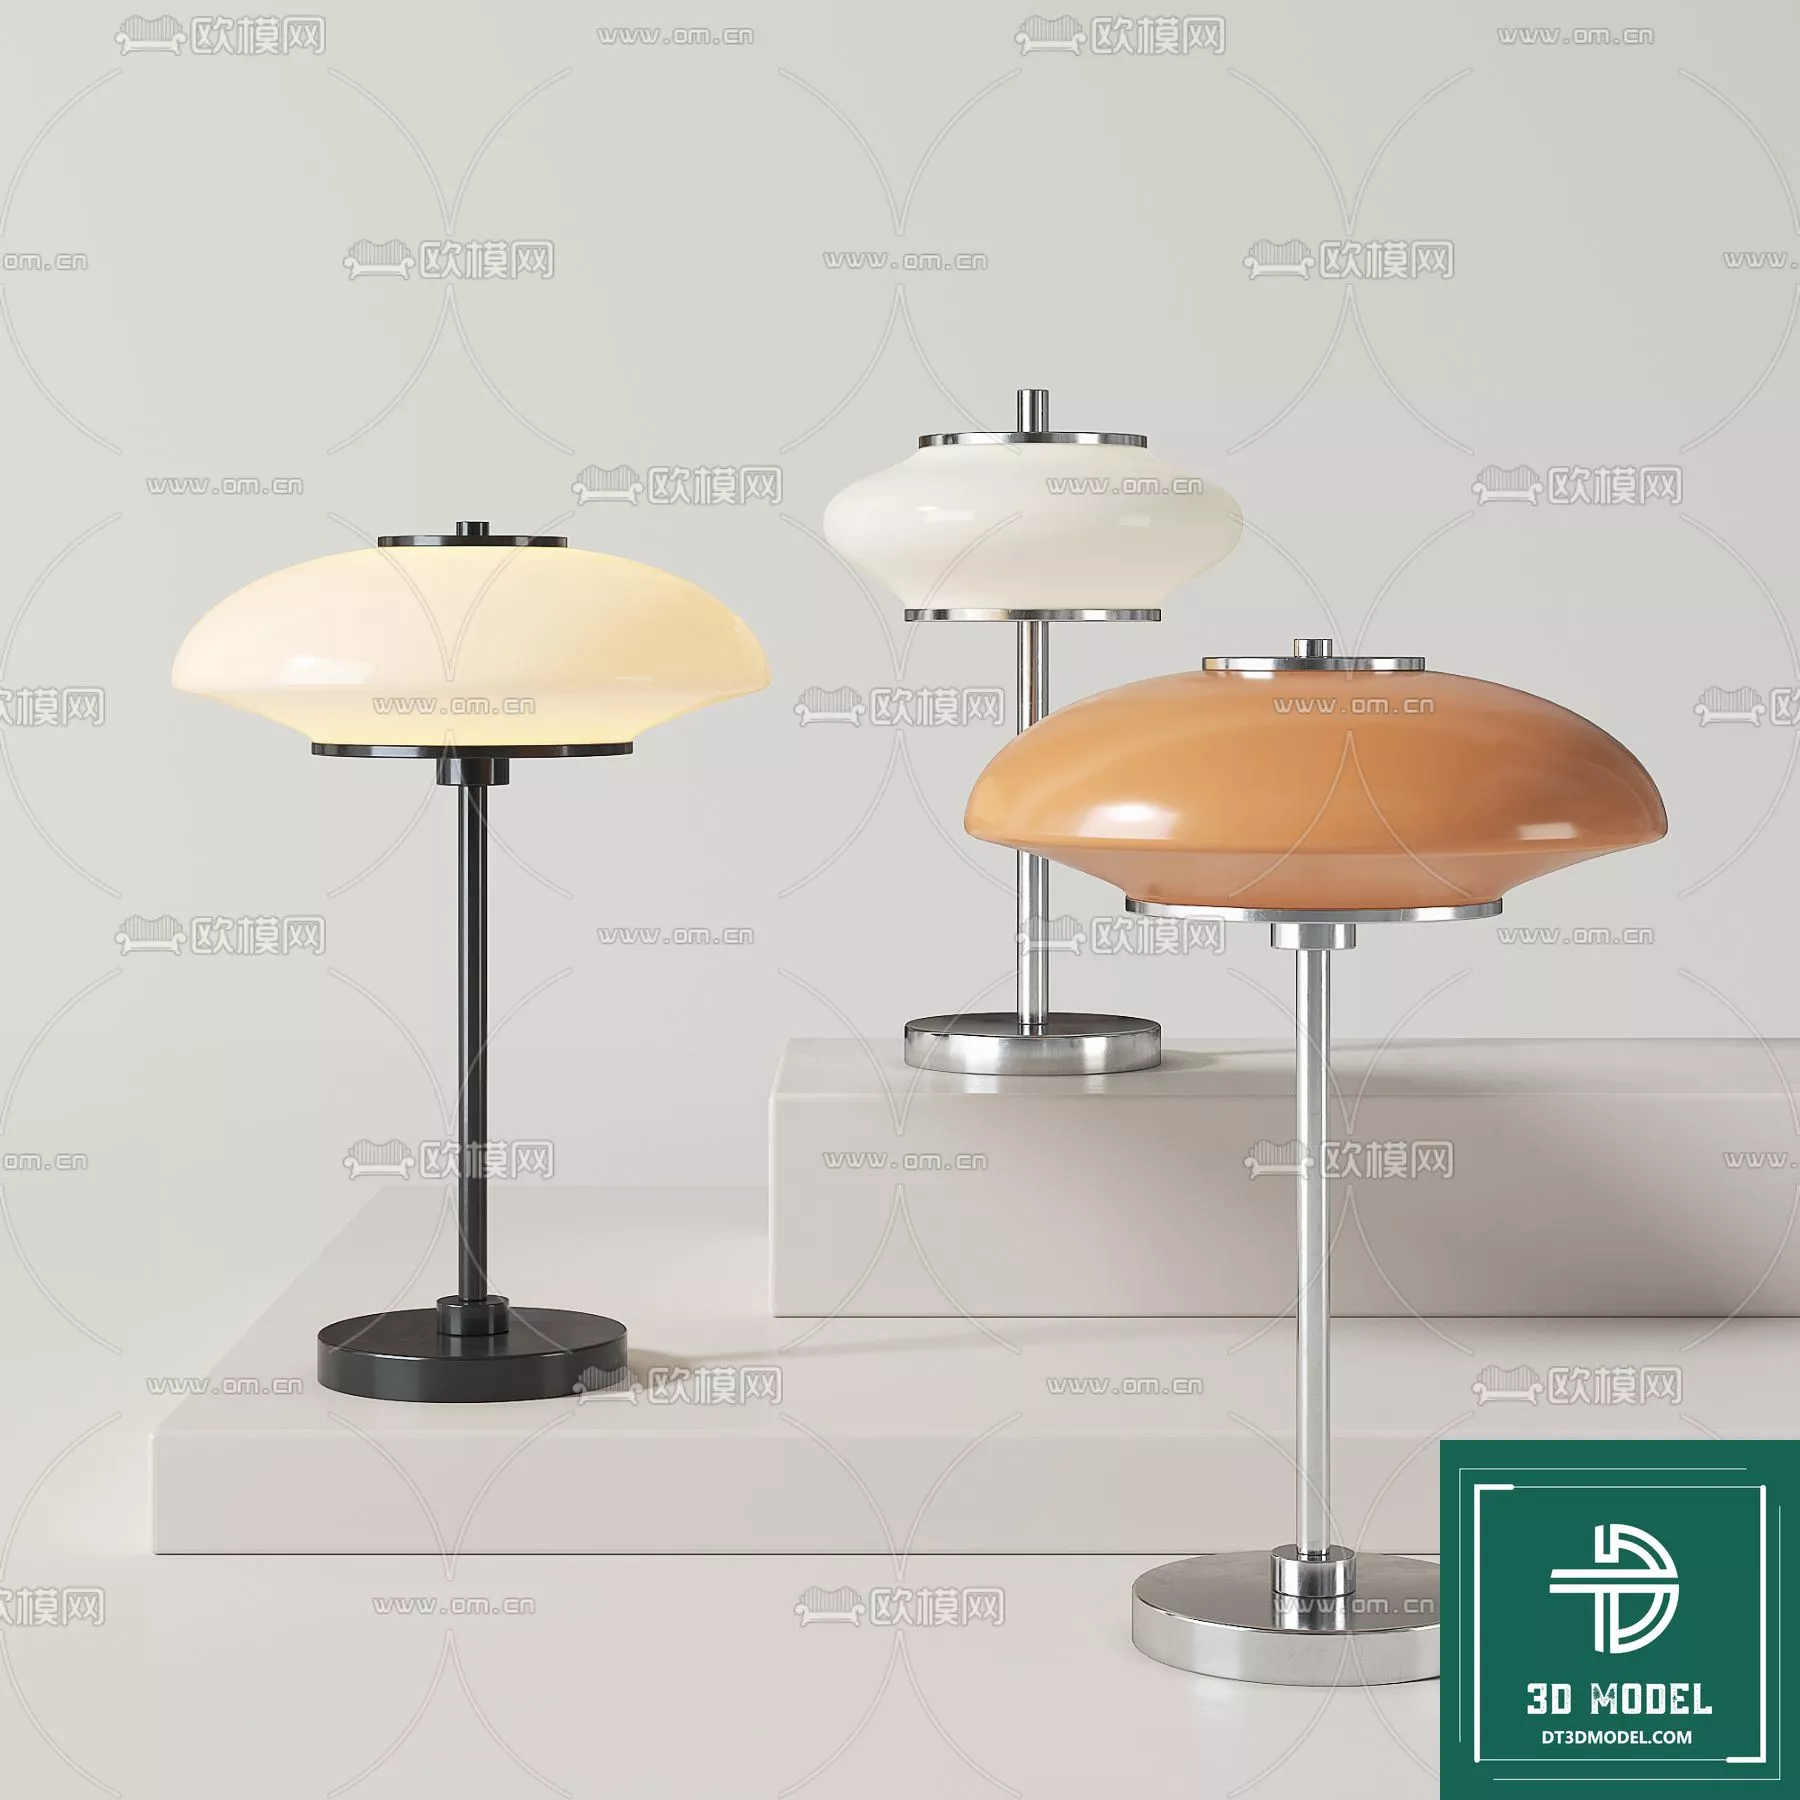 MODERN TABLE LAMP - SKETCHUP 3D MODEL - VRAY OR ENSCAPE - ID14611